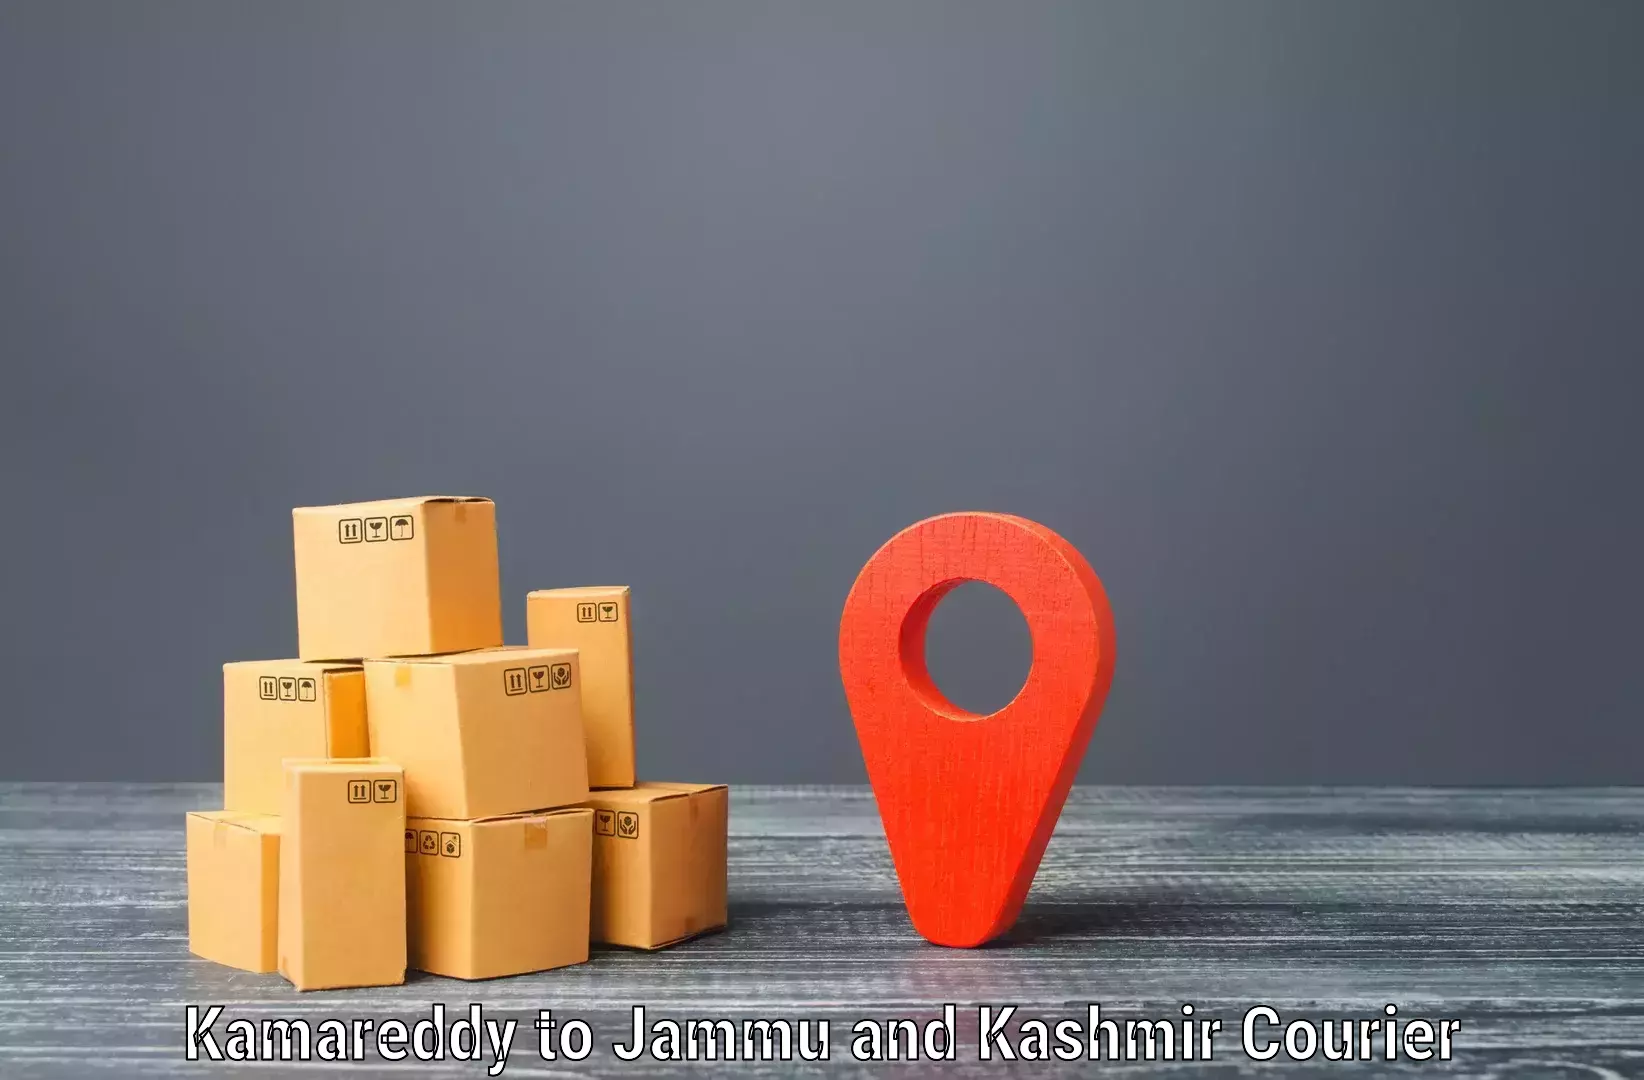 Smart shipping technology Kamareddy to Poonch